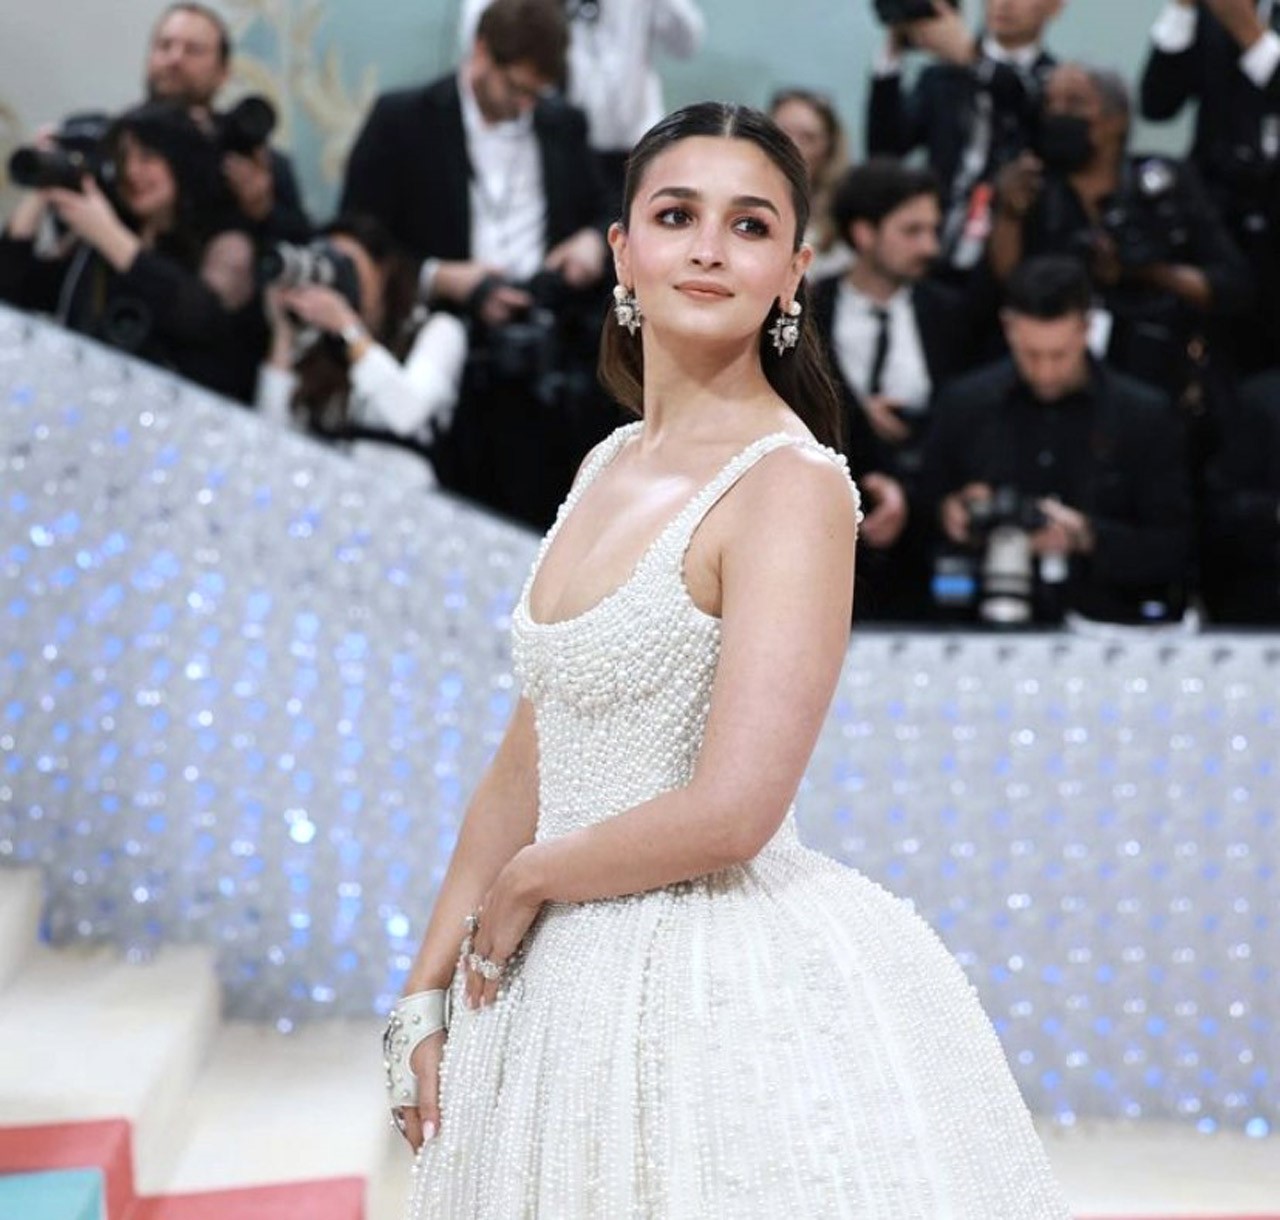 Met Gala 2023: Alia Bhatt is an angelic vision for the first time in Prabal Gurung's pearl-embellished gown